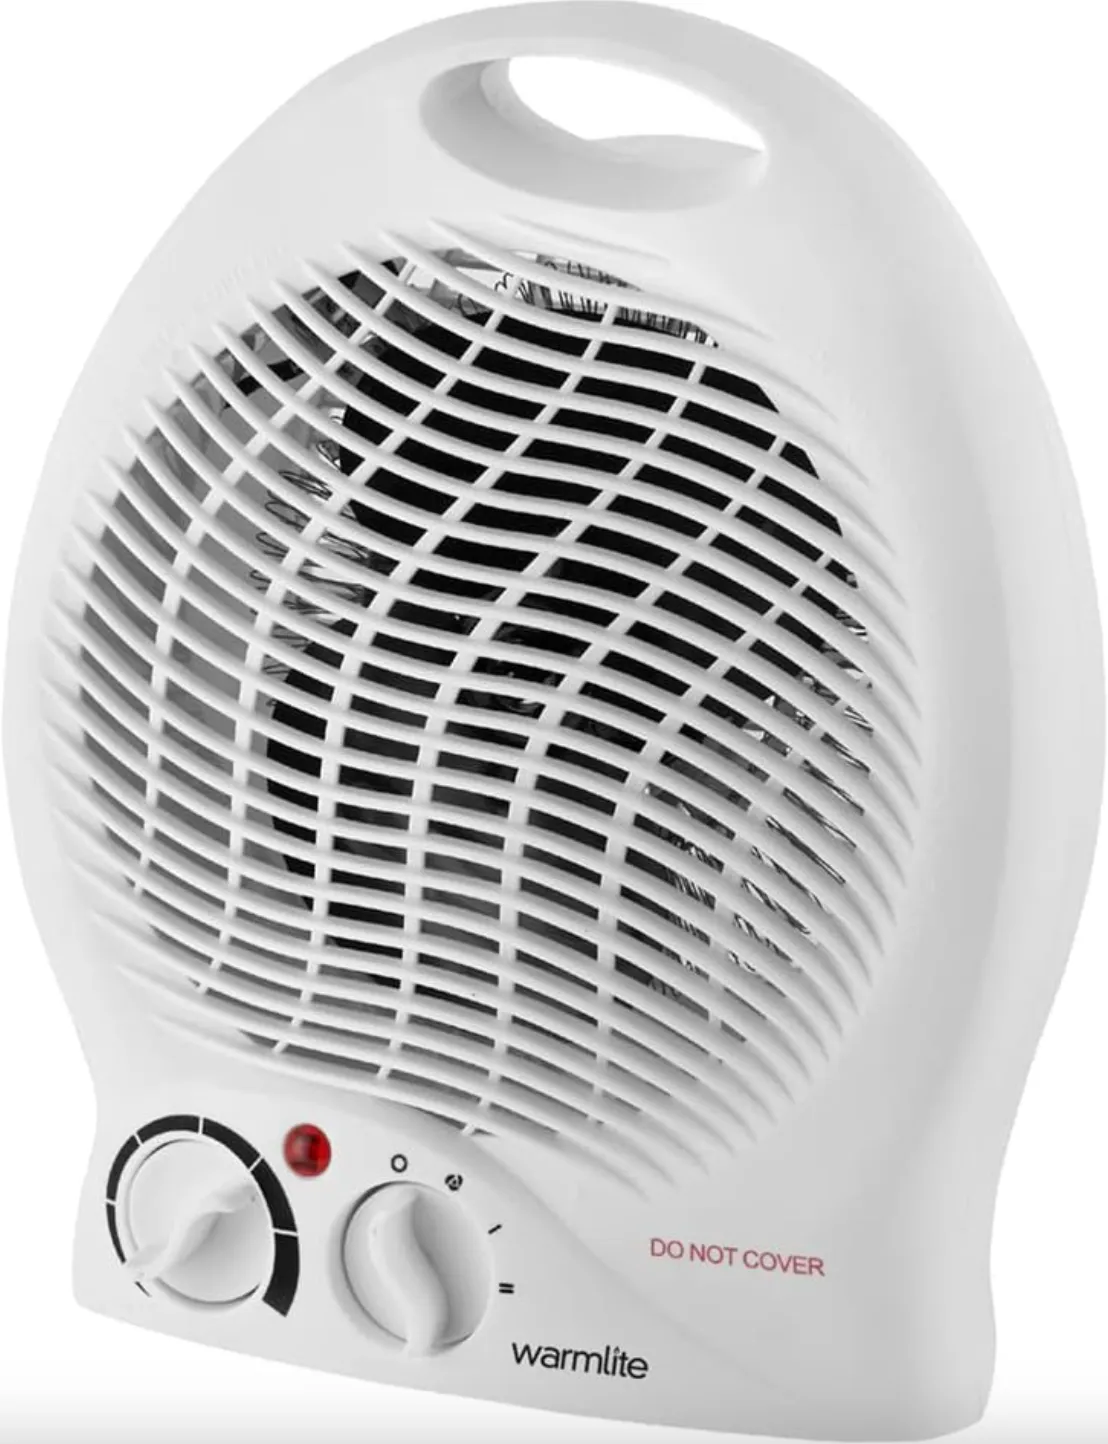 Warmlite WL44002 Thermo Fan Heater - was £19.99 now £14 (save 30%)